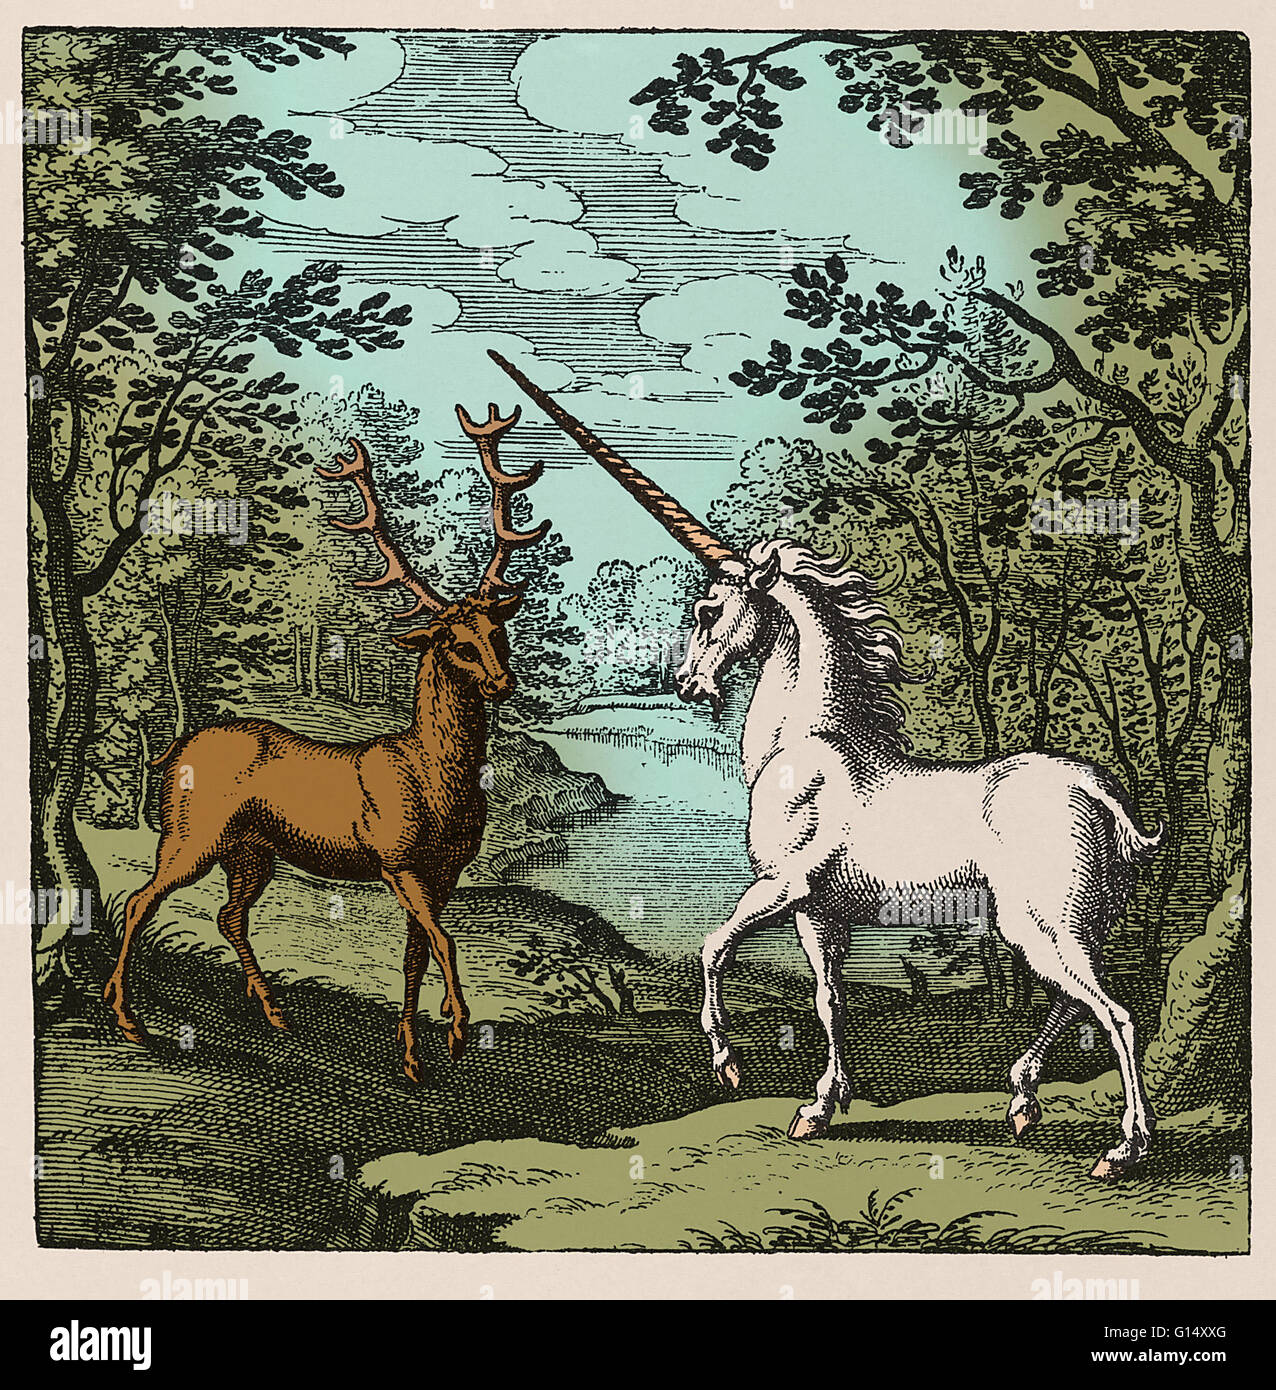 Alchemy. Historical artwork from The Book of Lambspring (1749 edition, first published 1625) of a meeting between a deer and a unicorn in a wood. In alchemy, the deer signified the Sun or the soul and the unicorn represented the Moon or the spirit. The fo Stock Photo